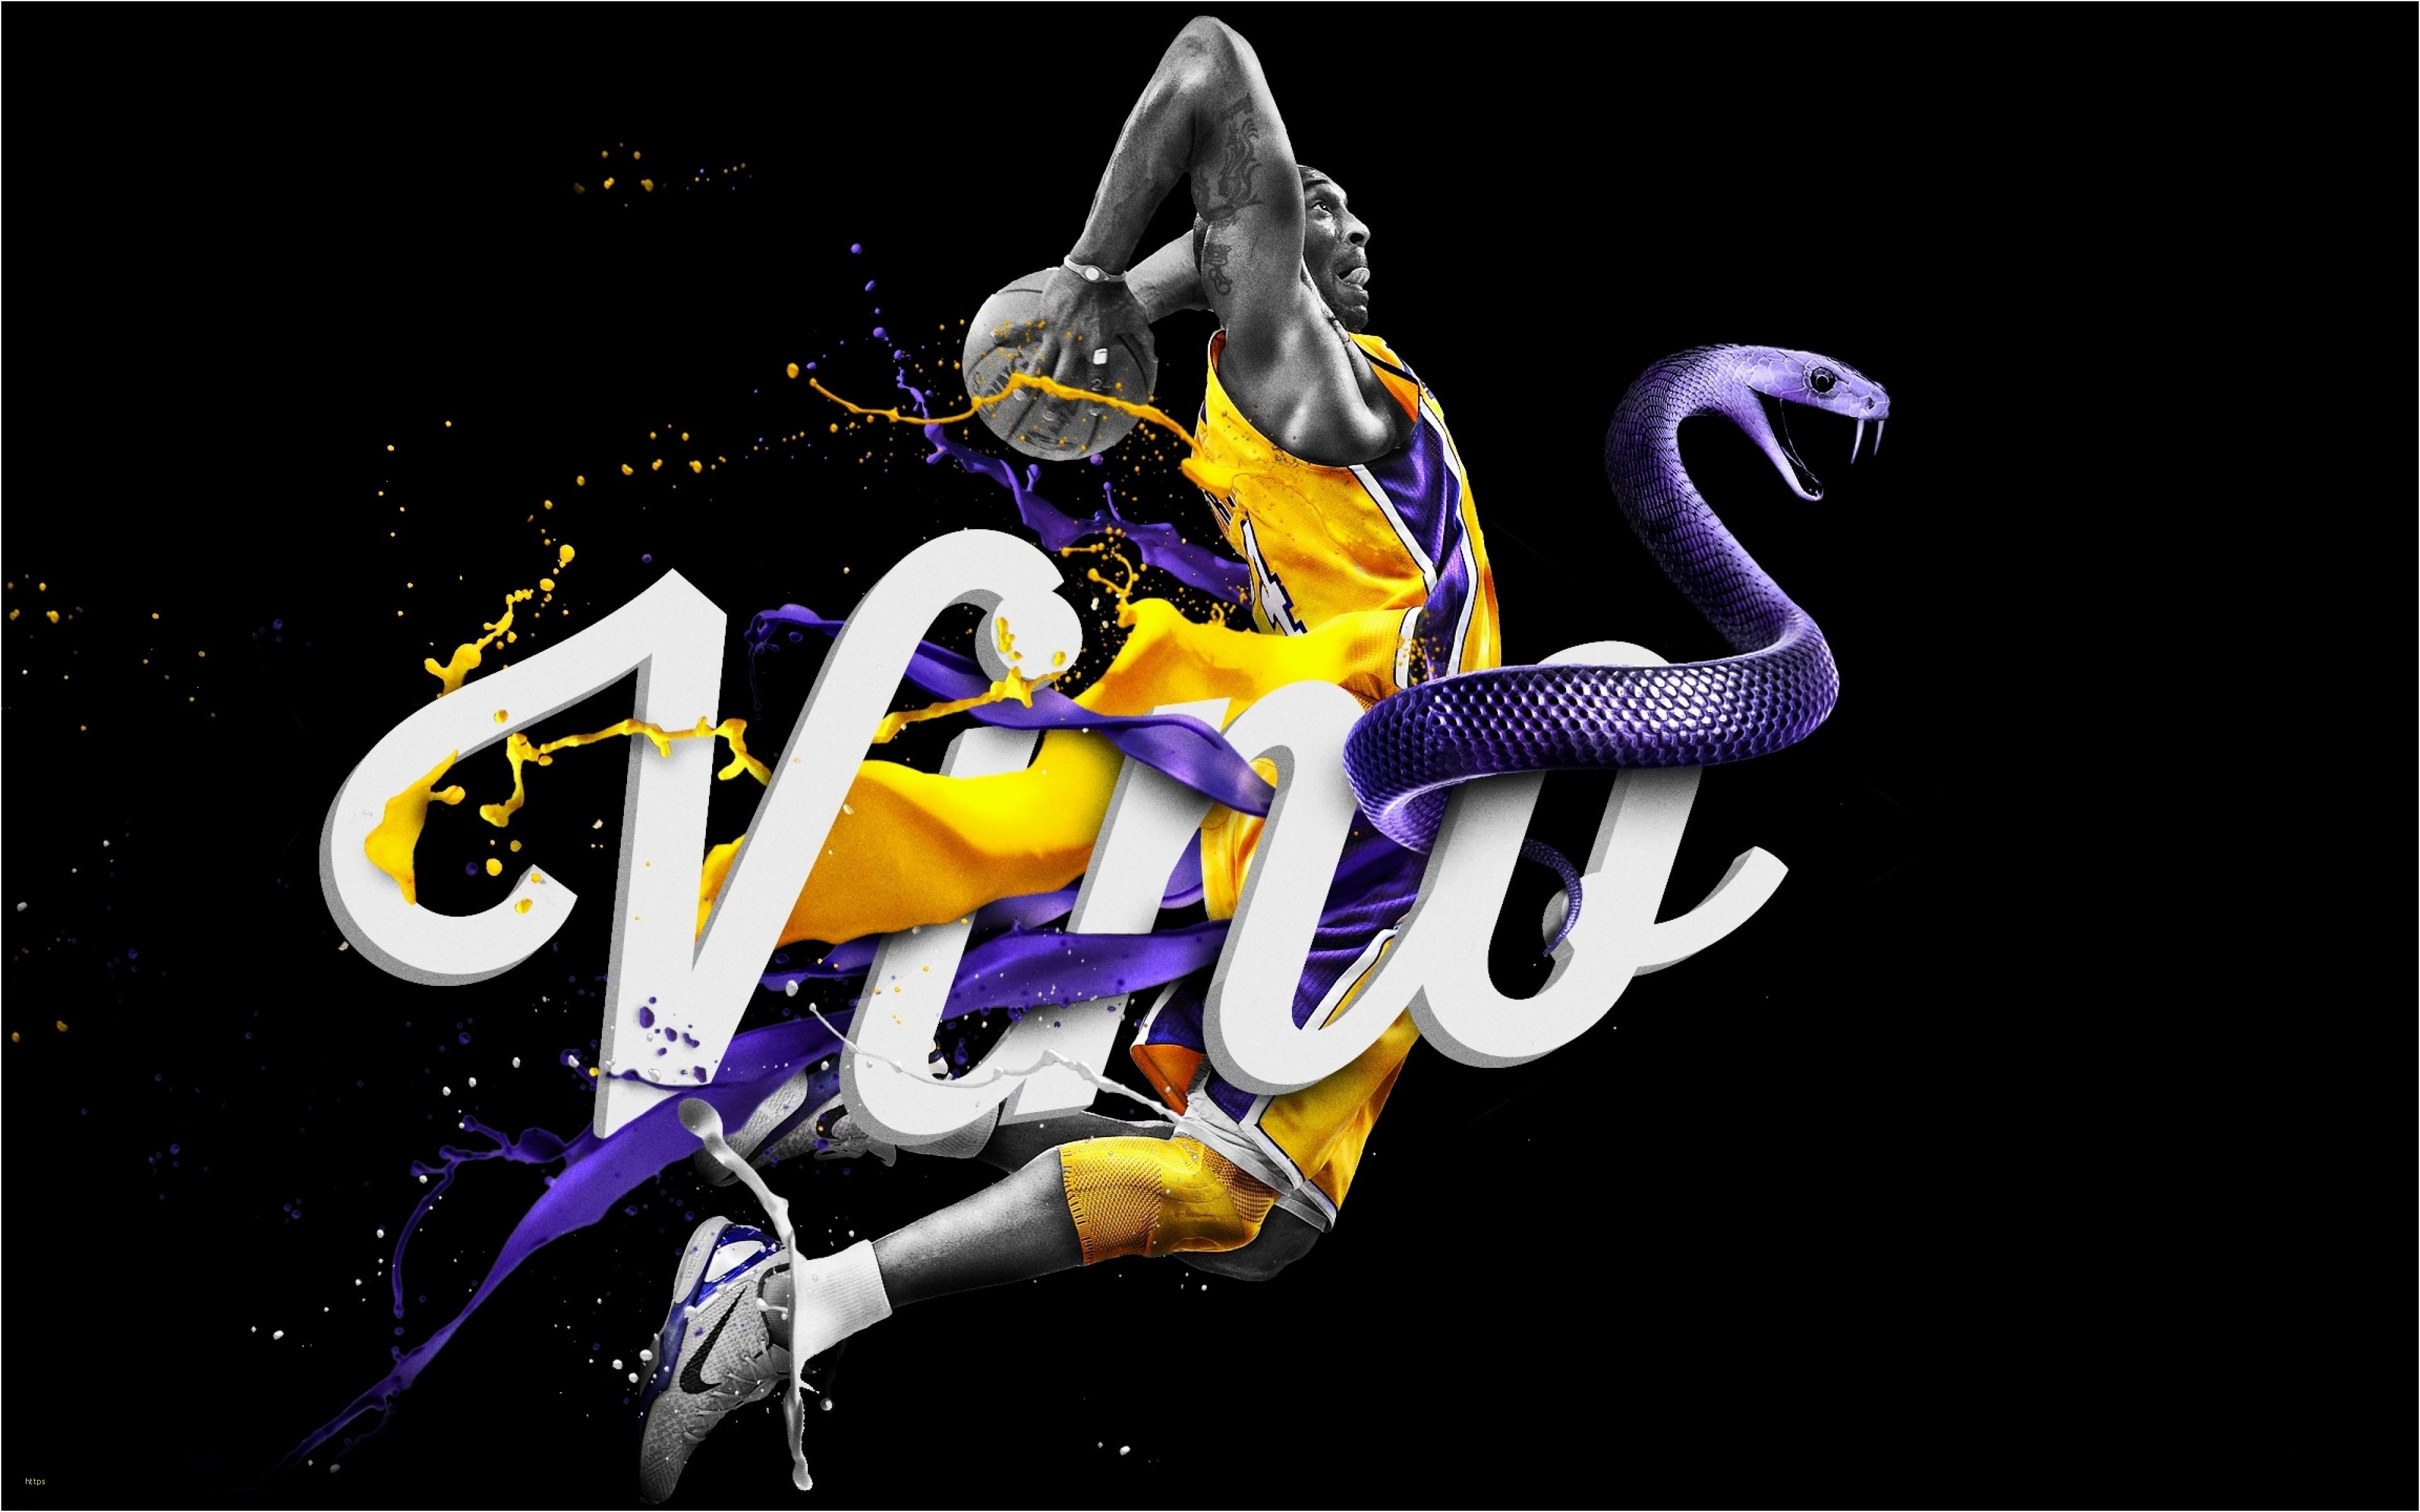 Los Angeles Lakers Wallpapers Wallpaper Cave